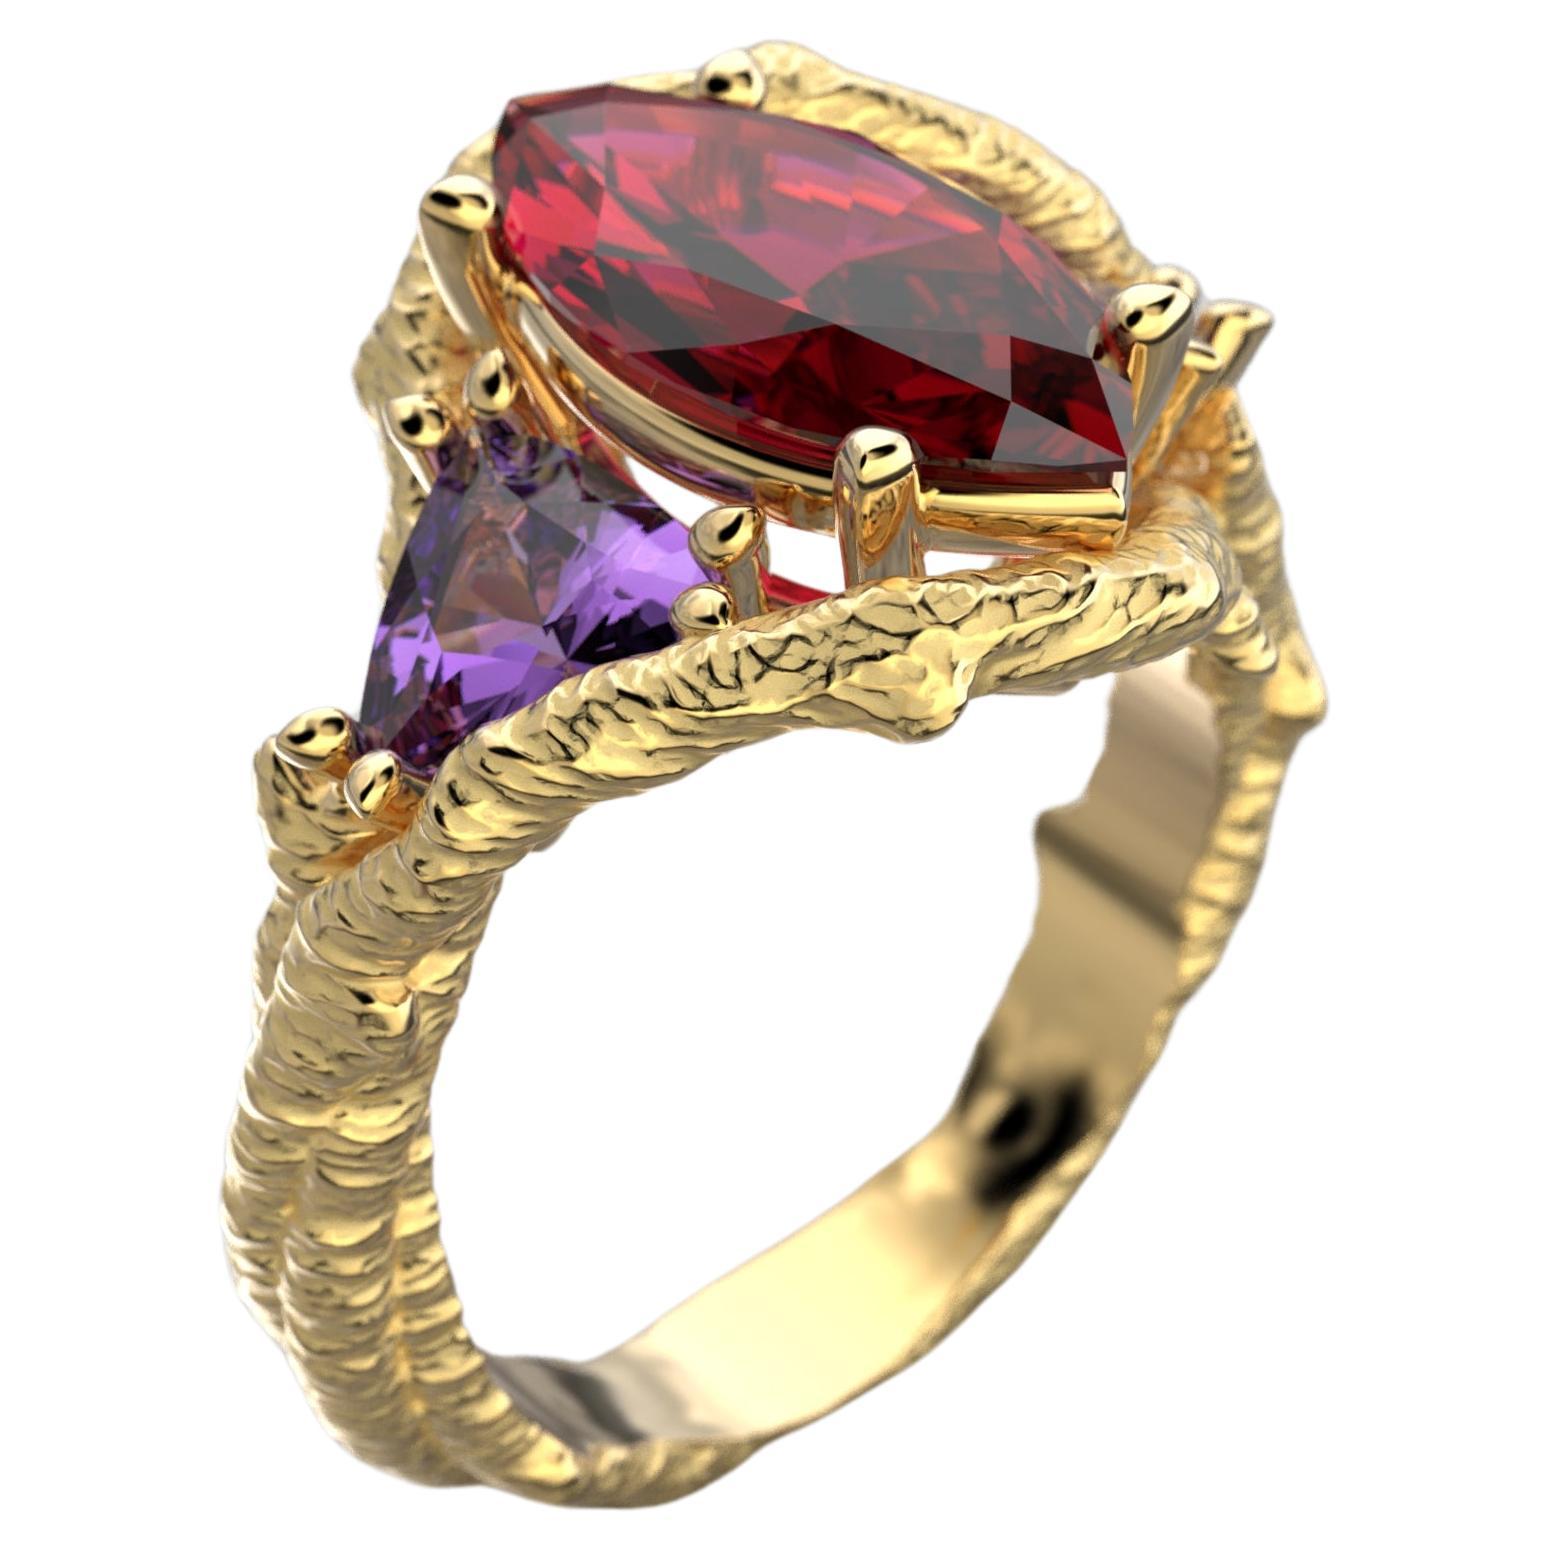 Rhodolite Garnet and Amethyst 14k Solid gold ring, Gold Ring Made In Italy